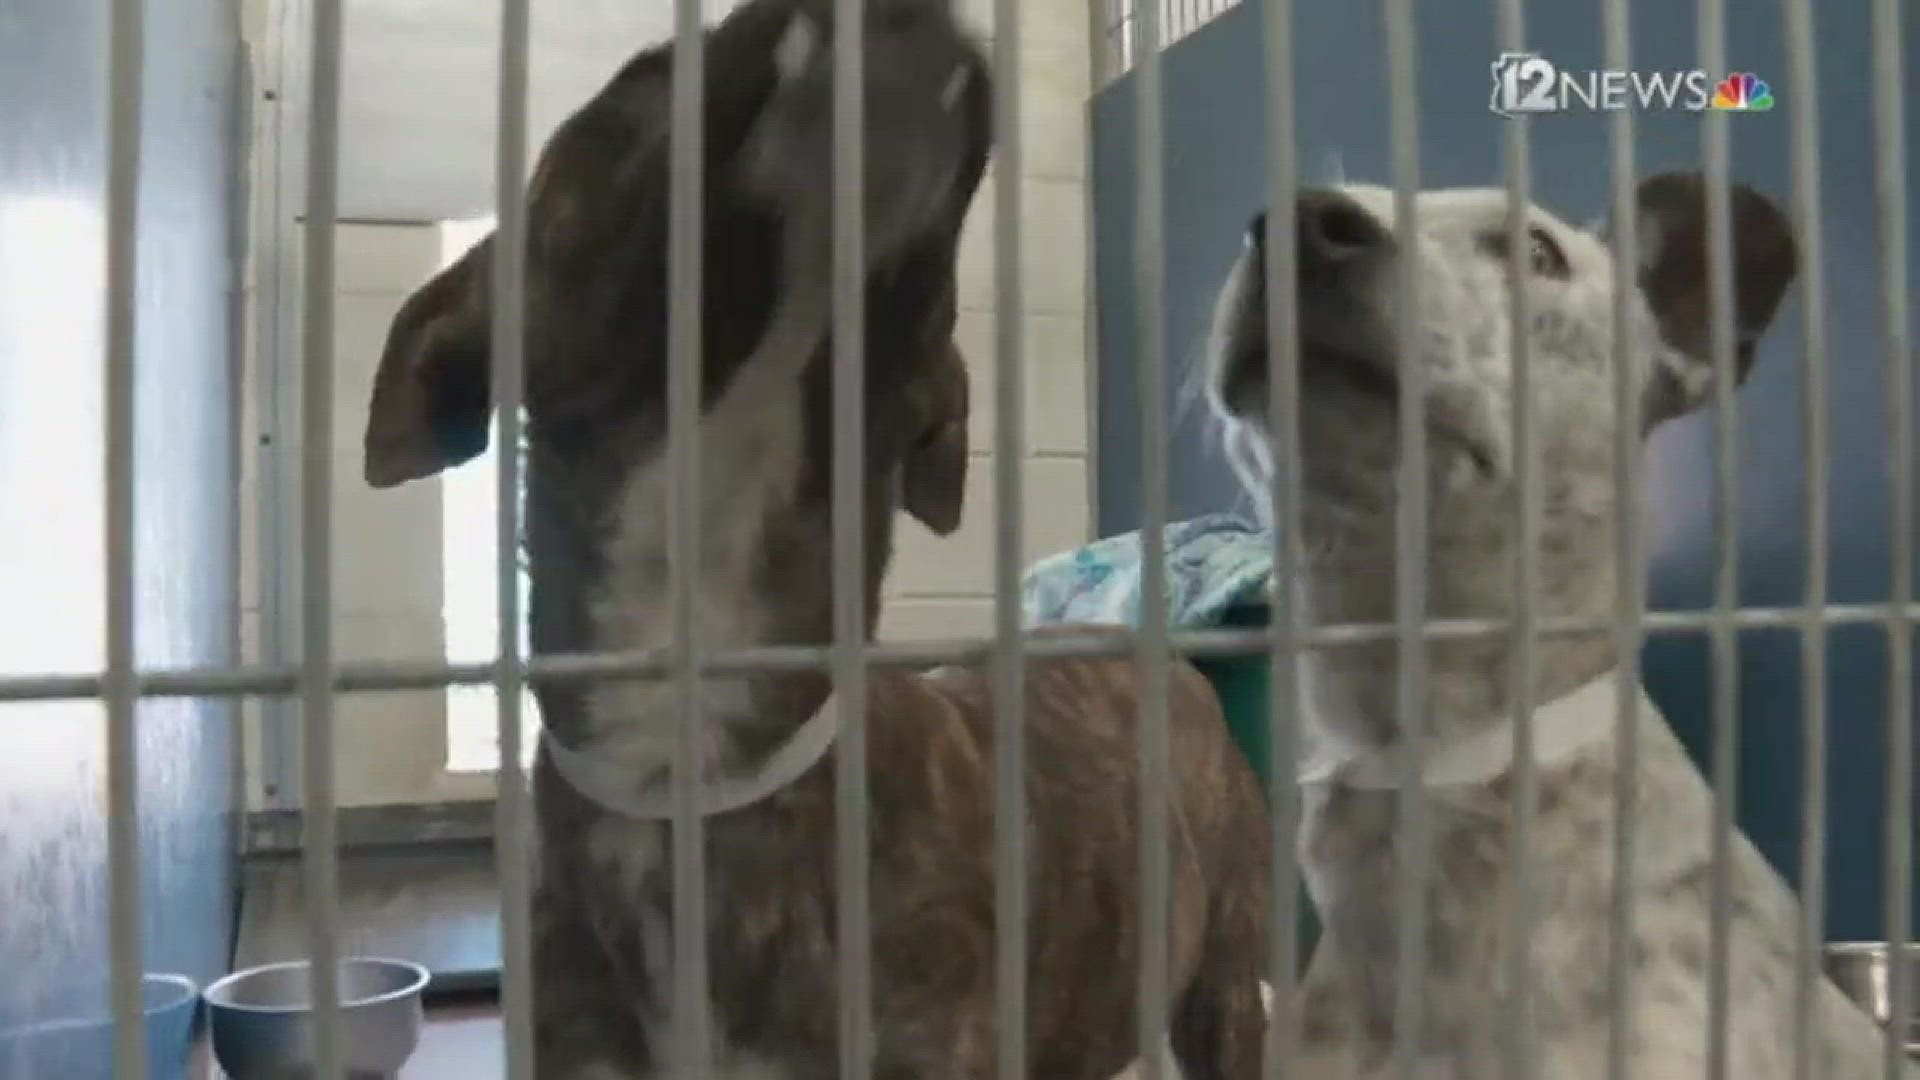 Two dogs will be up for adoption Friday after they were rescued from a tight spot.